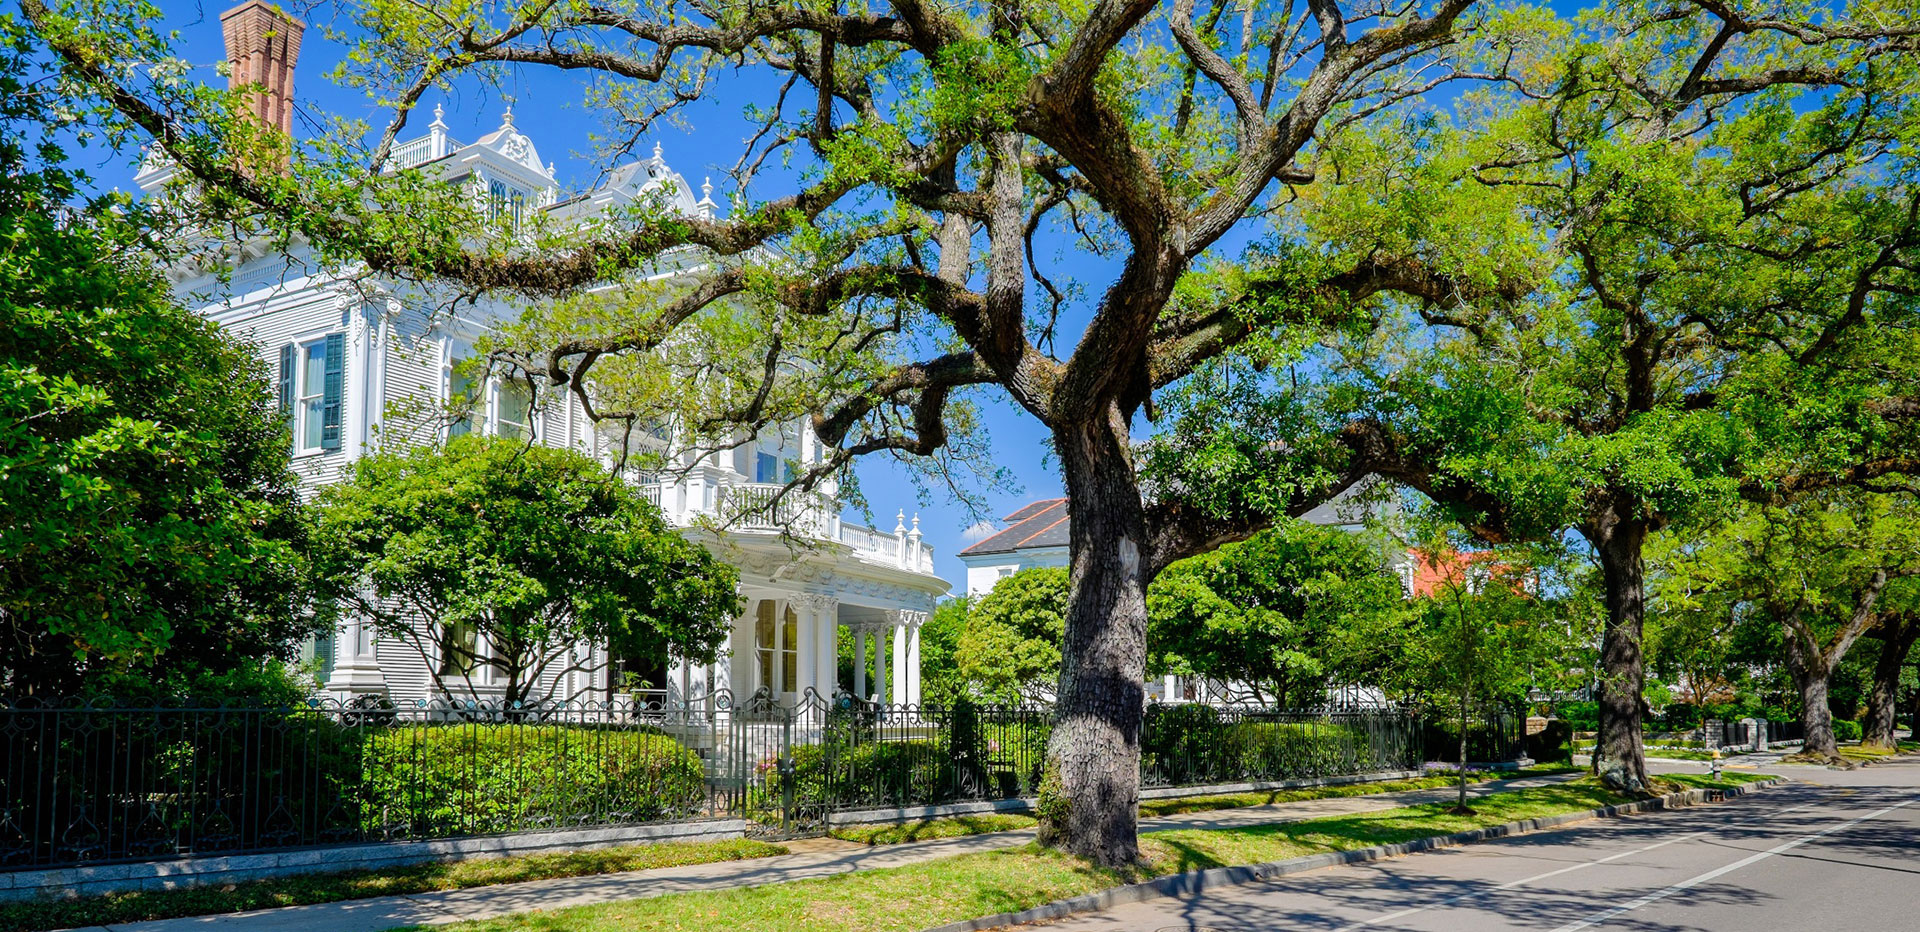 Historical Southern Style Homes on Saint Charles Avenue in New Orleans